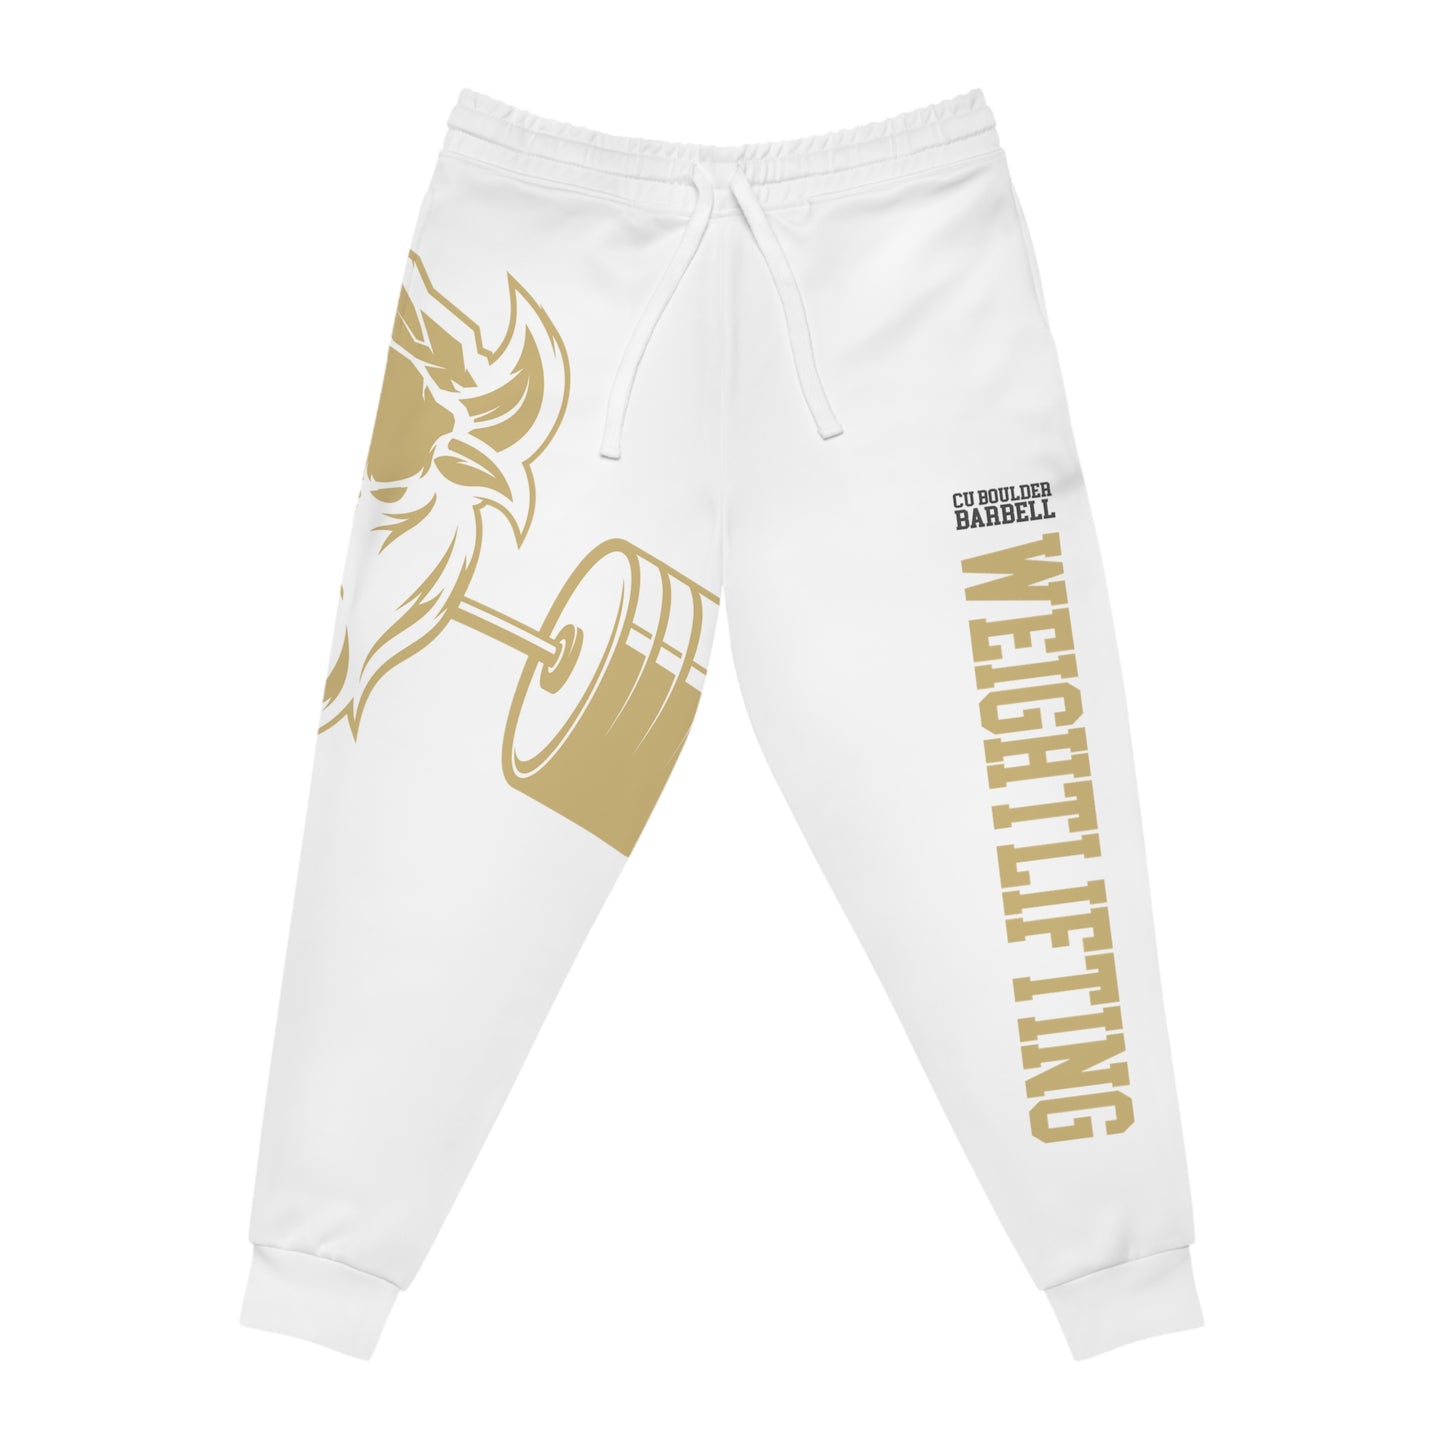 CU Barbell Weightlifting Warm-Up Joggers (White)